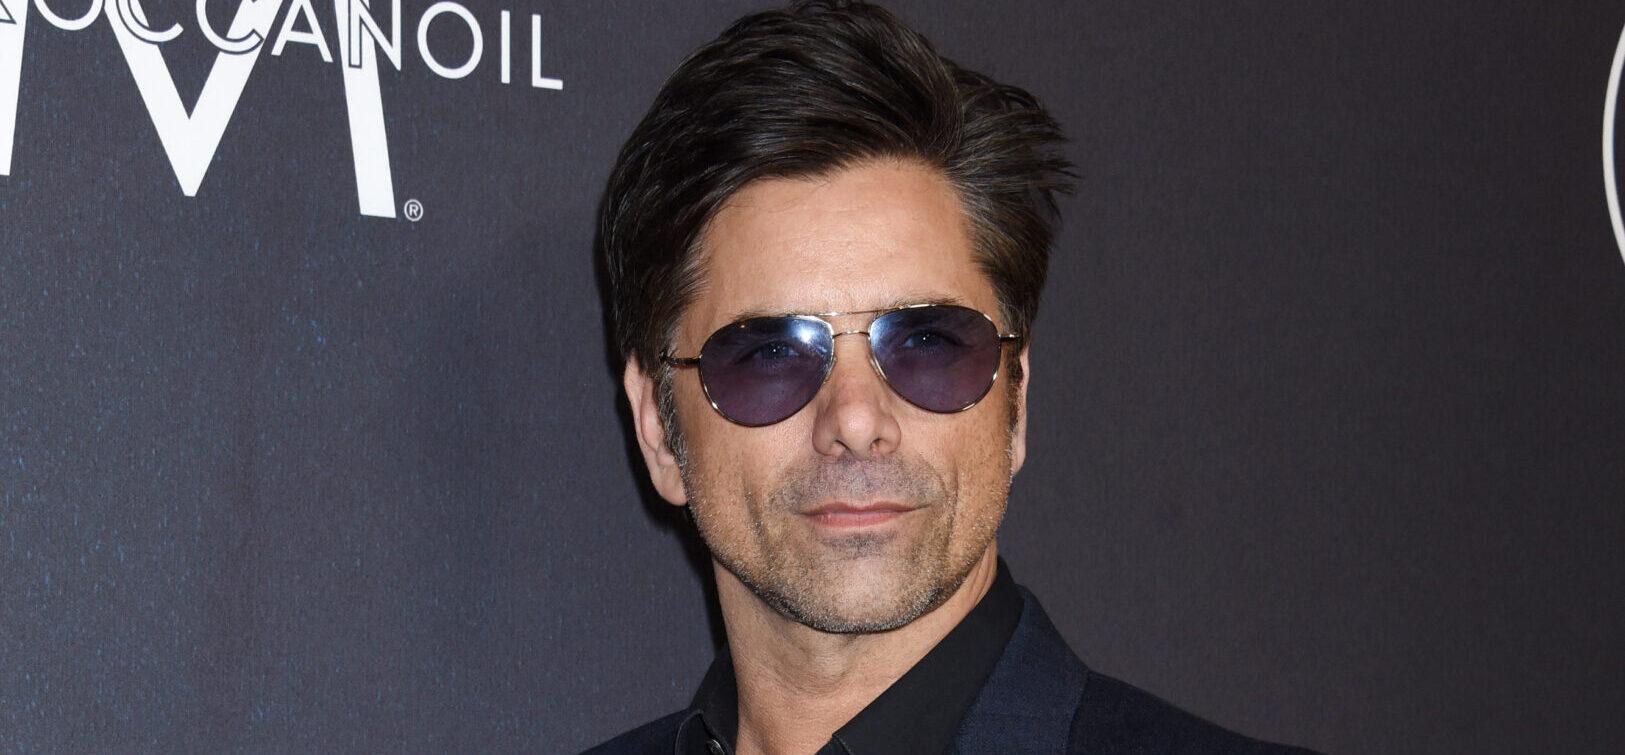 John Stamos Says NO To Having Another Child After Raw Confession